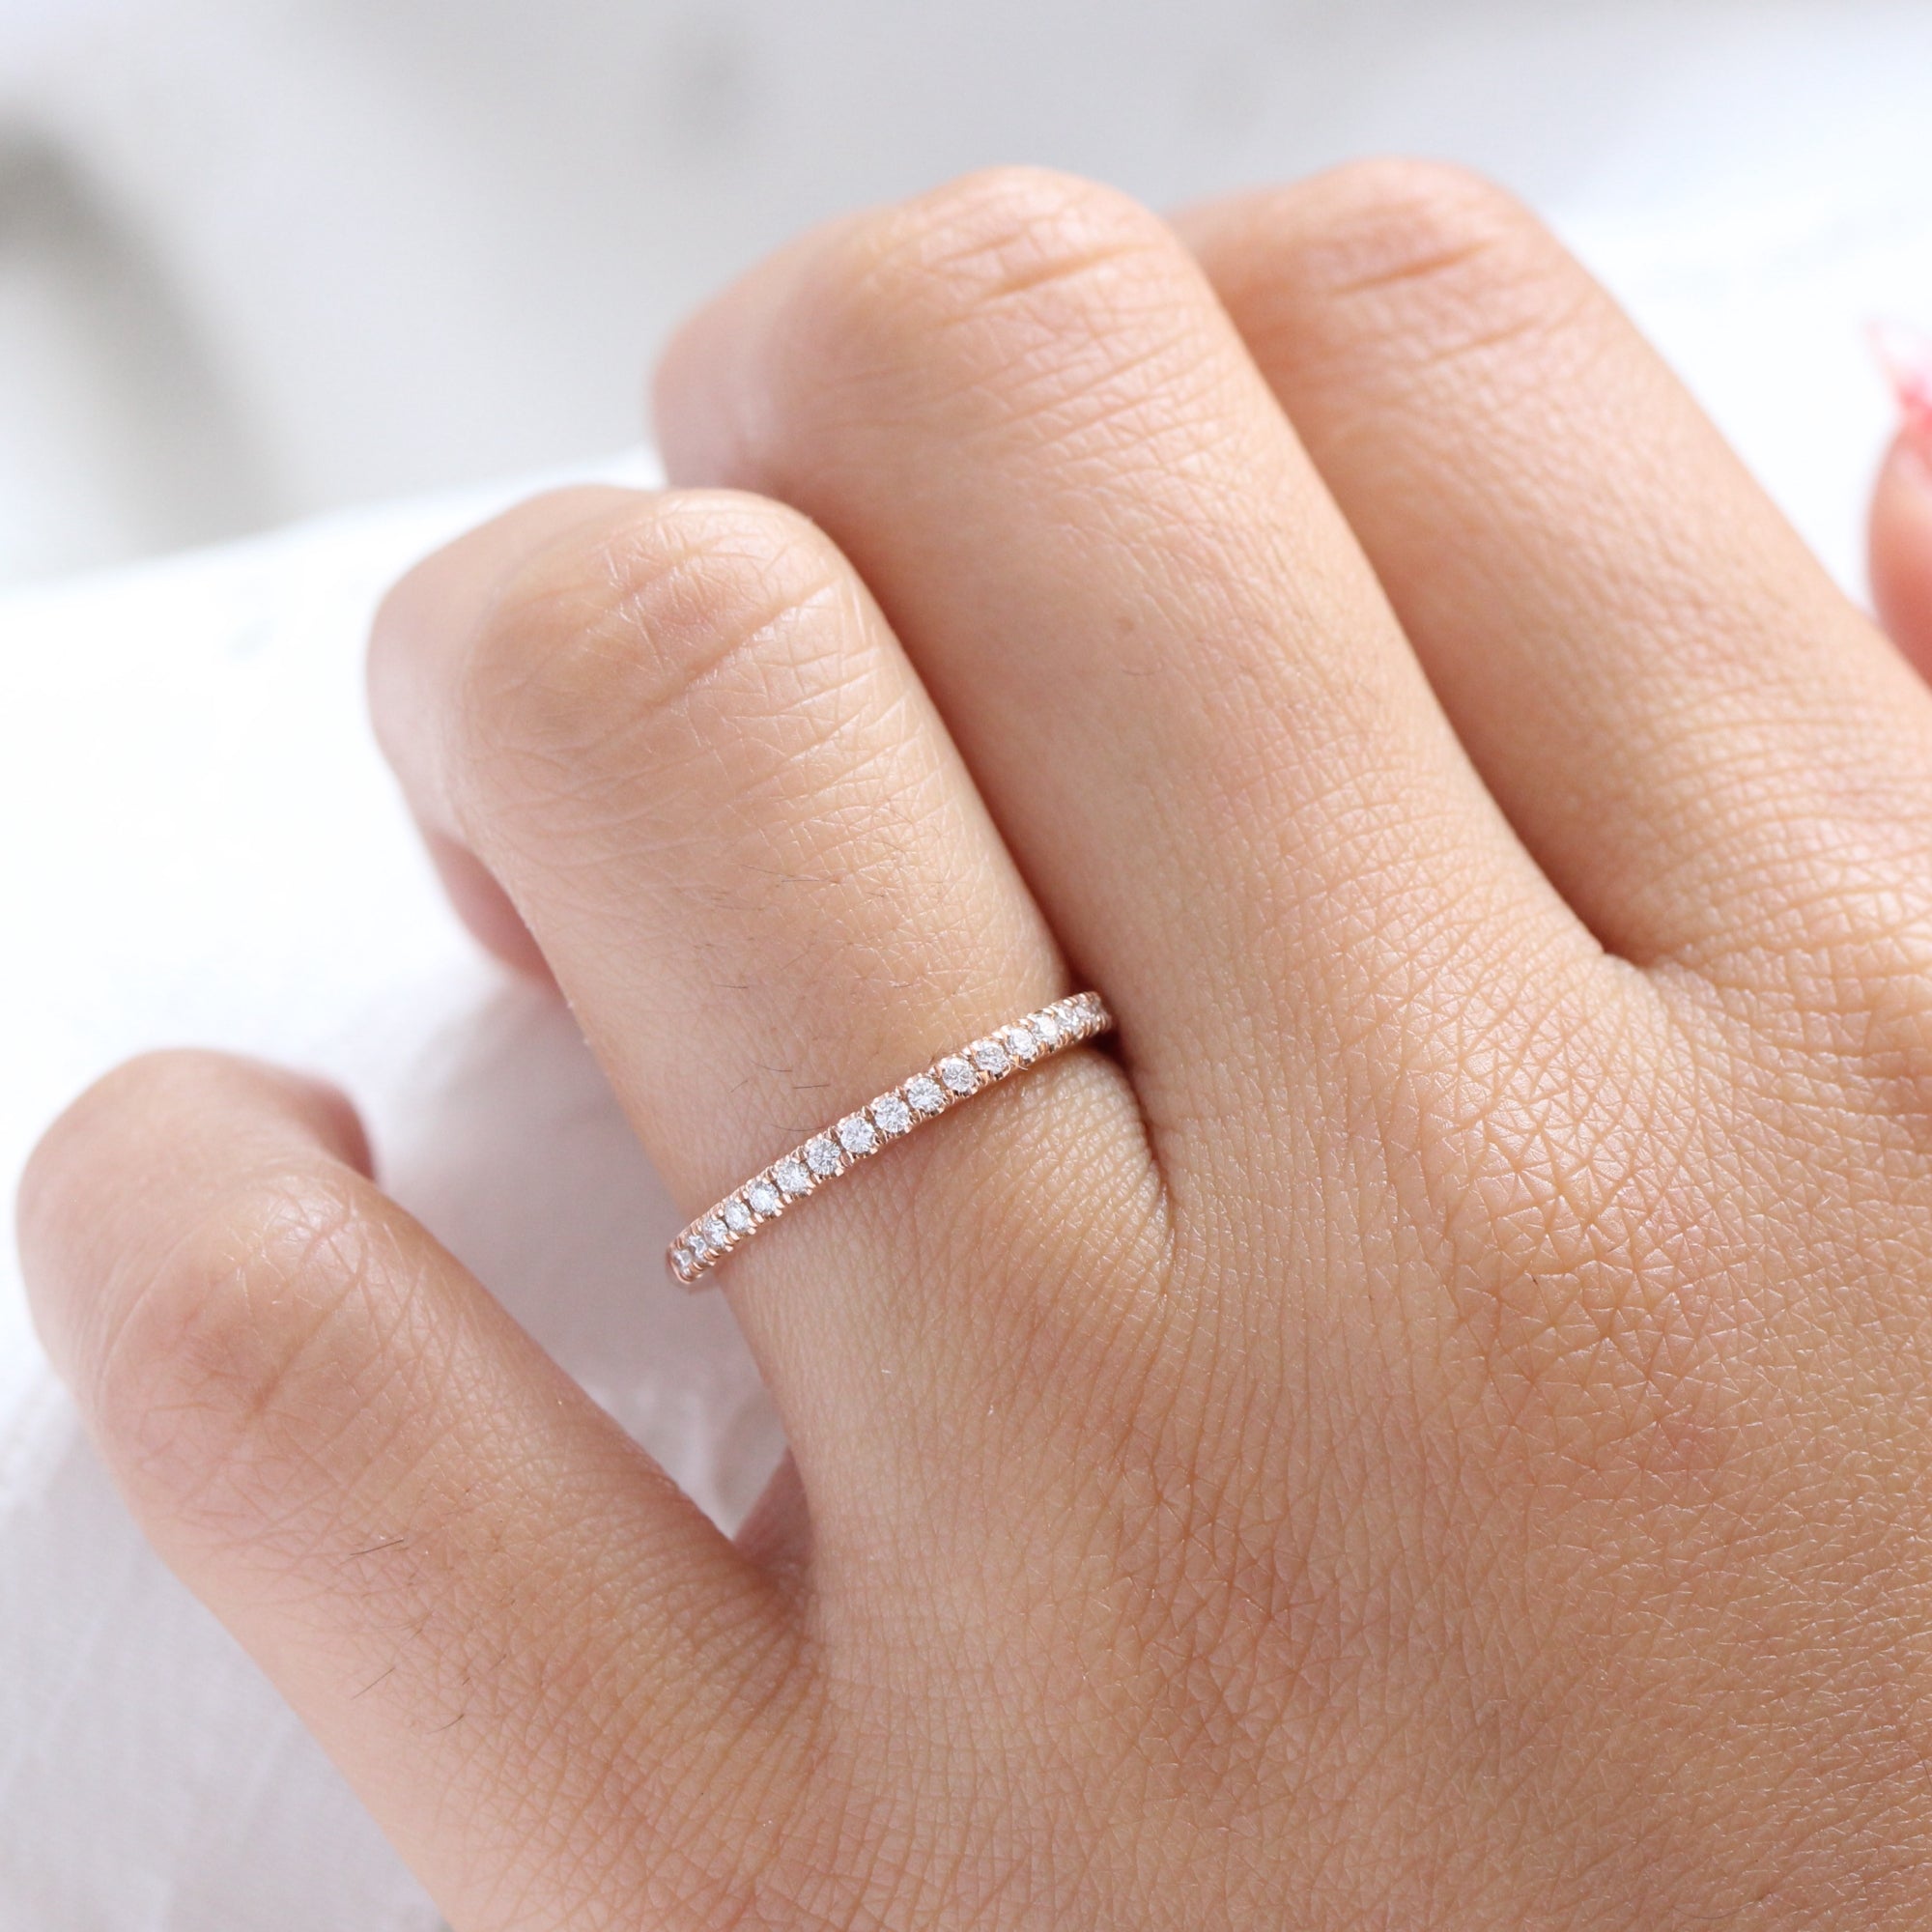 Pave Diamond Wedding Ring in Gold or Platinum Half Eternity Band